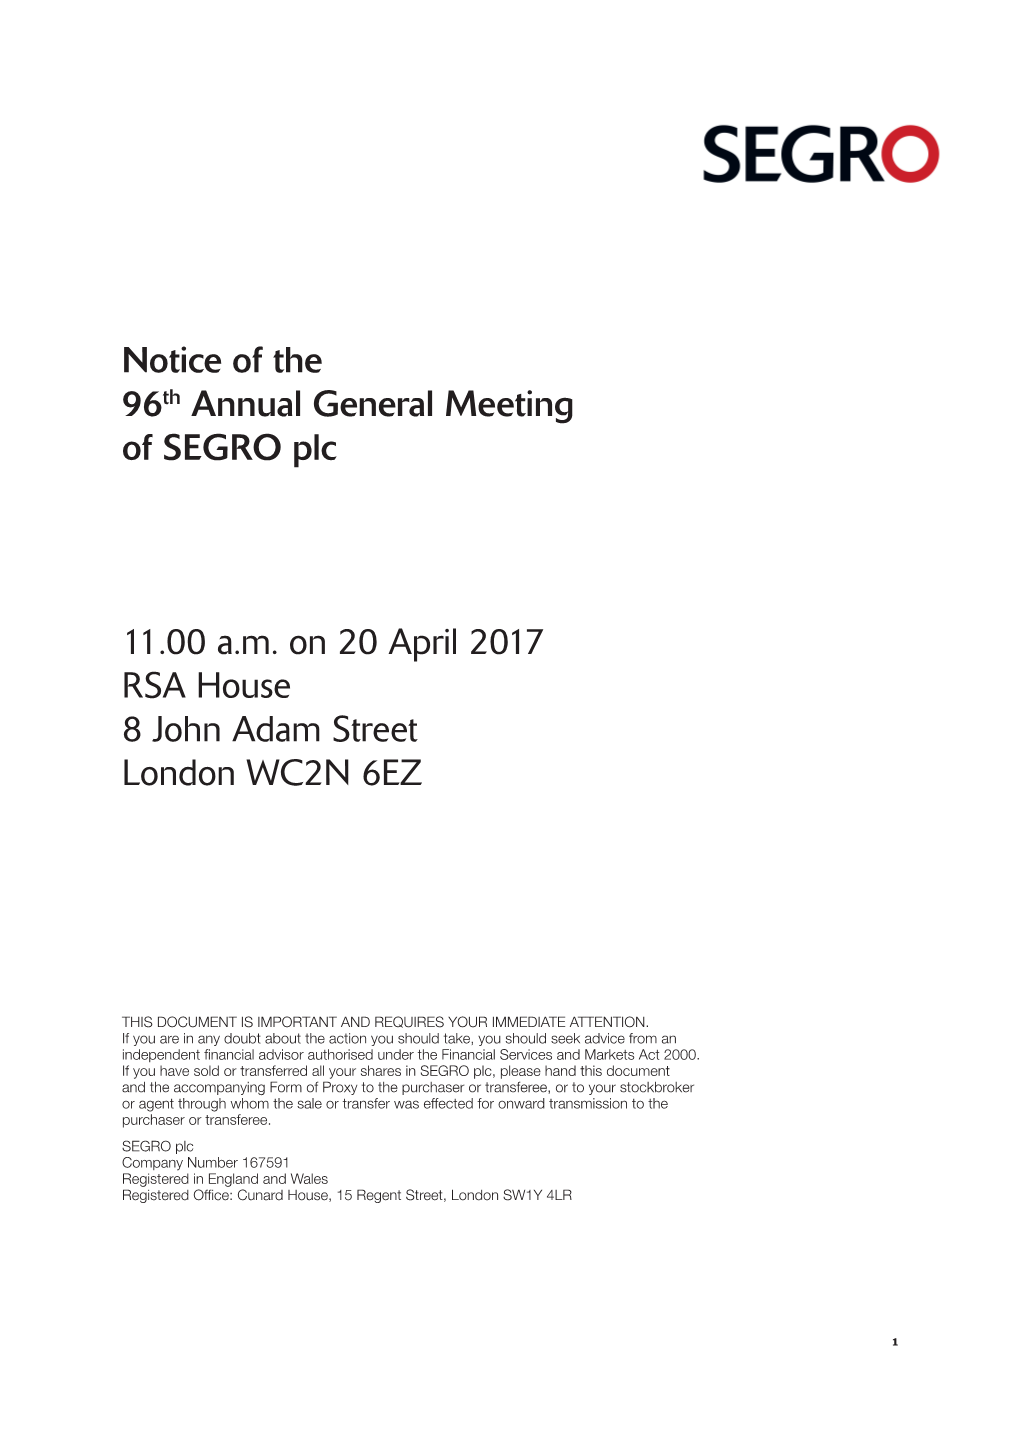 Notice of the 96Th Annual General Meeting of SEGRO Plc 11.00 A.M